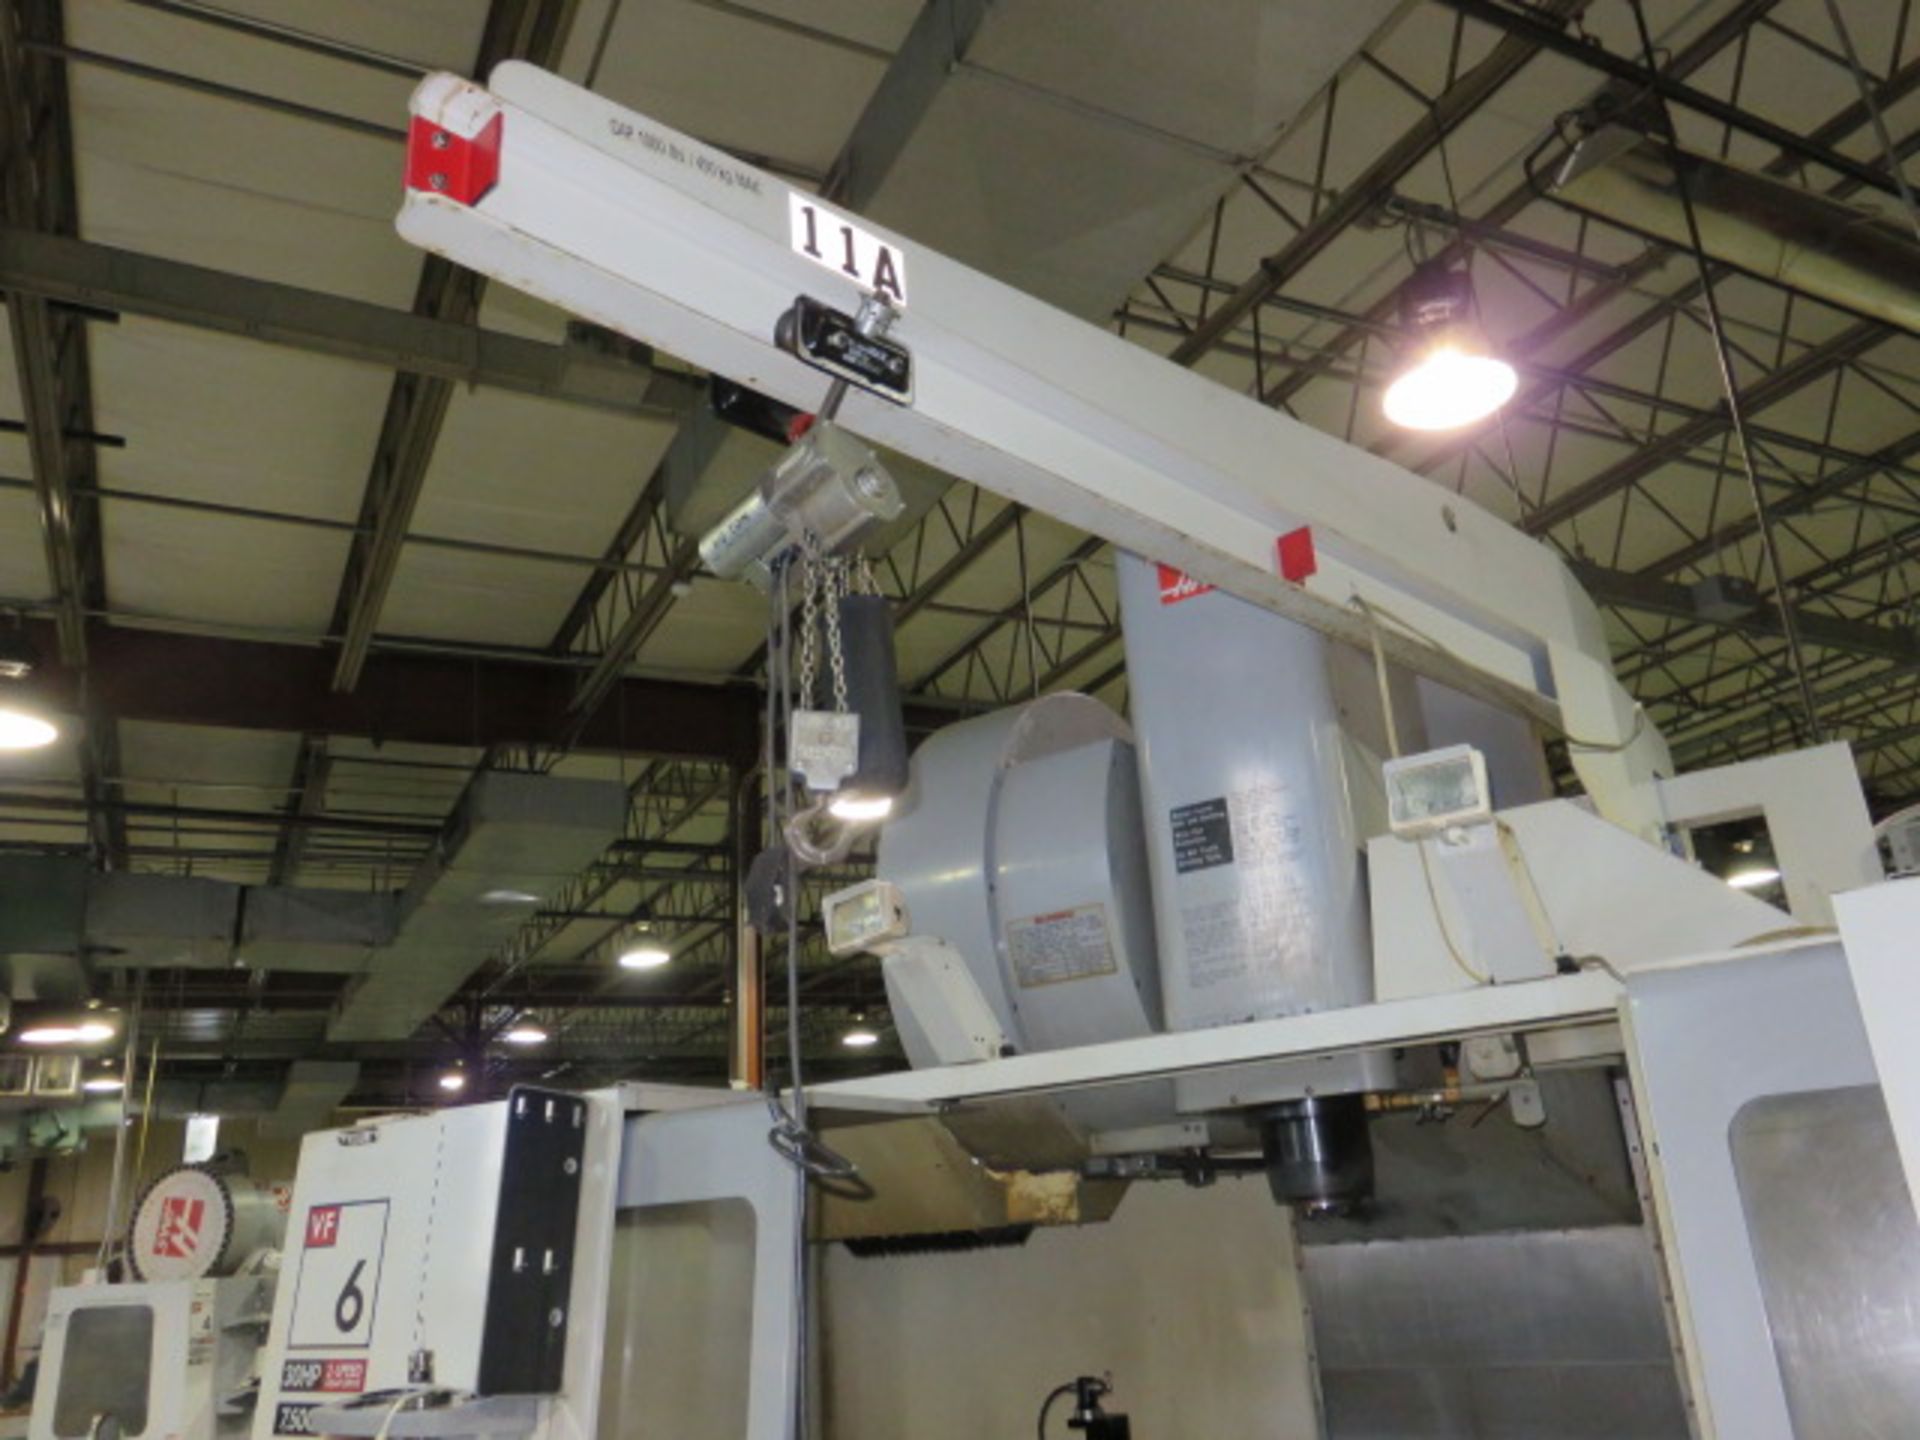 2006 HAAS VF-6/50 CNC VERTICAL MACHINING CENTER, S/N 1050547, WIRED FOR 5 AXIS , (REPLACED SPNDL.) - Image 5 of 7